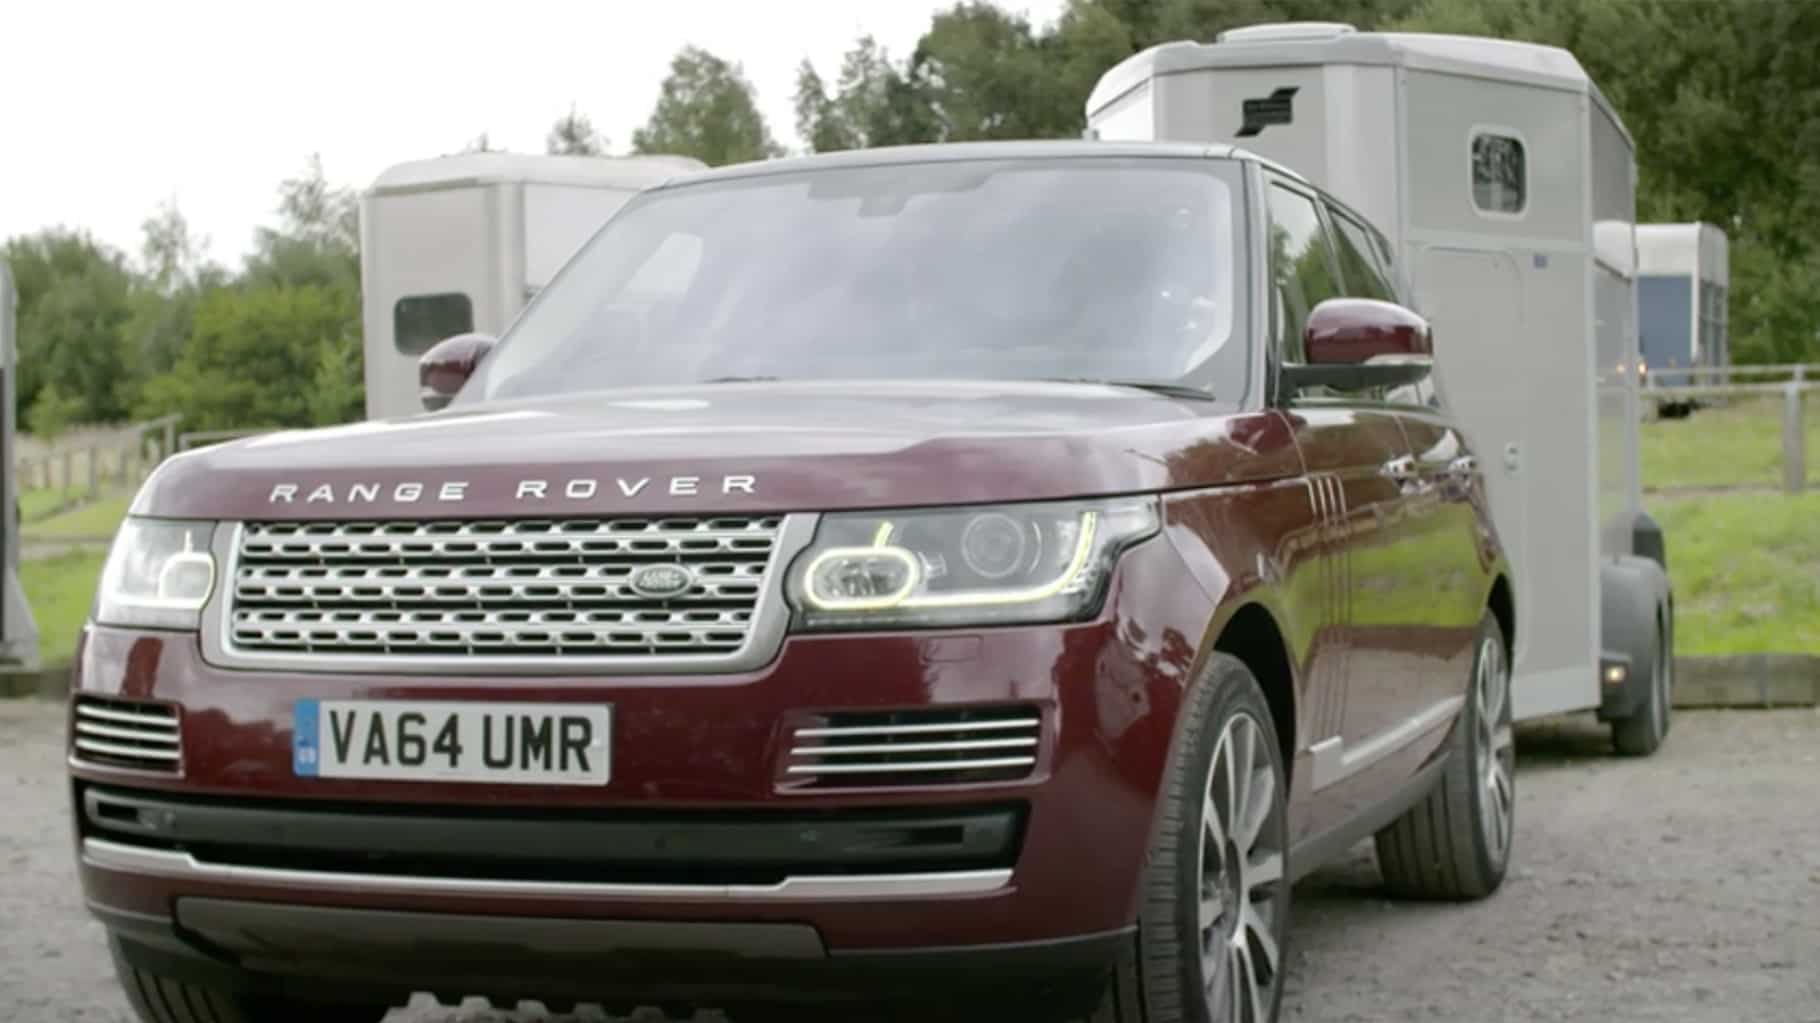 Range Rover Sport towing the new concept transparent trailer